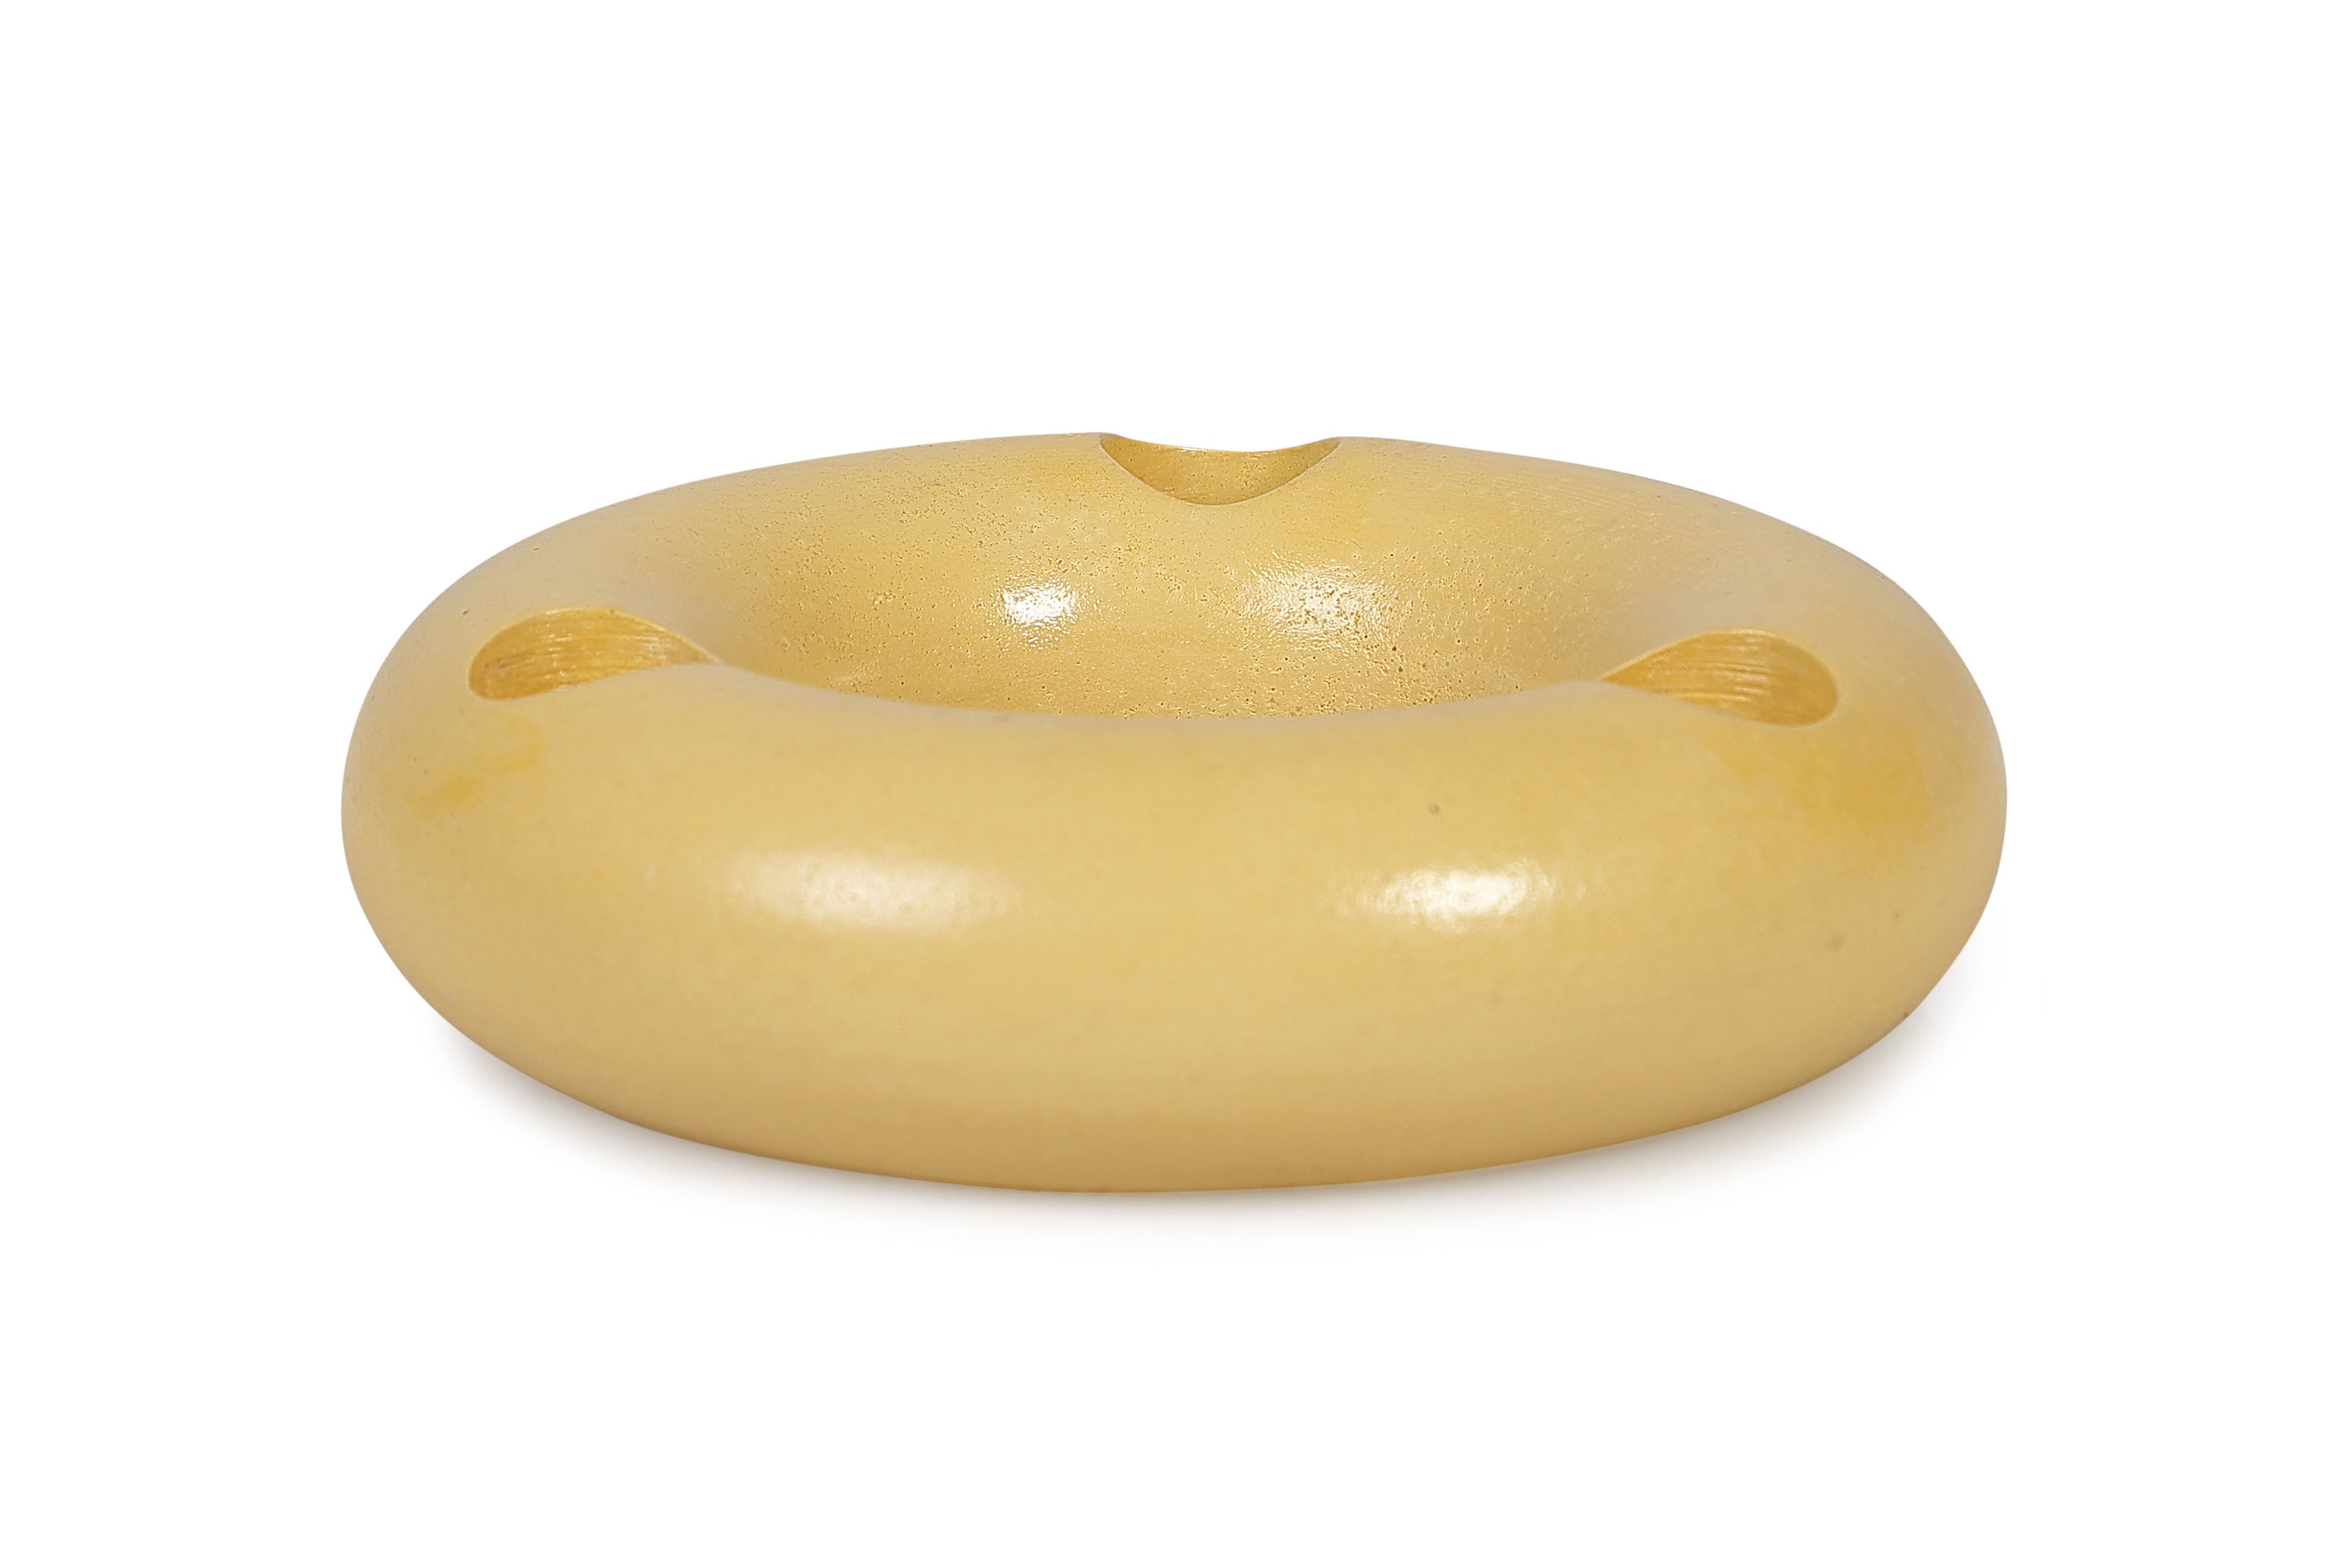 Nordic Donut Style Concrete Candle Holder - Mustard Yellow (Set of 2)